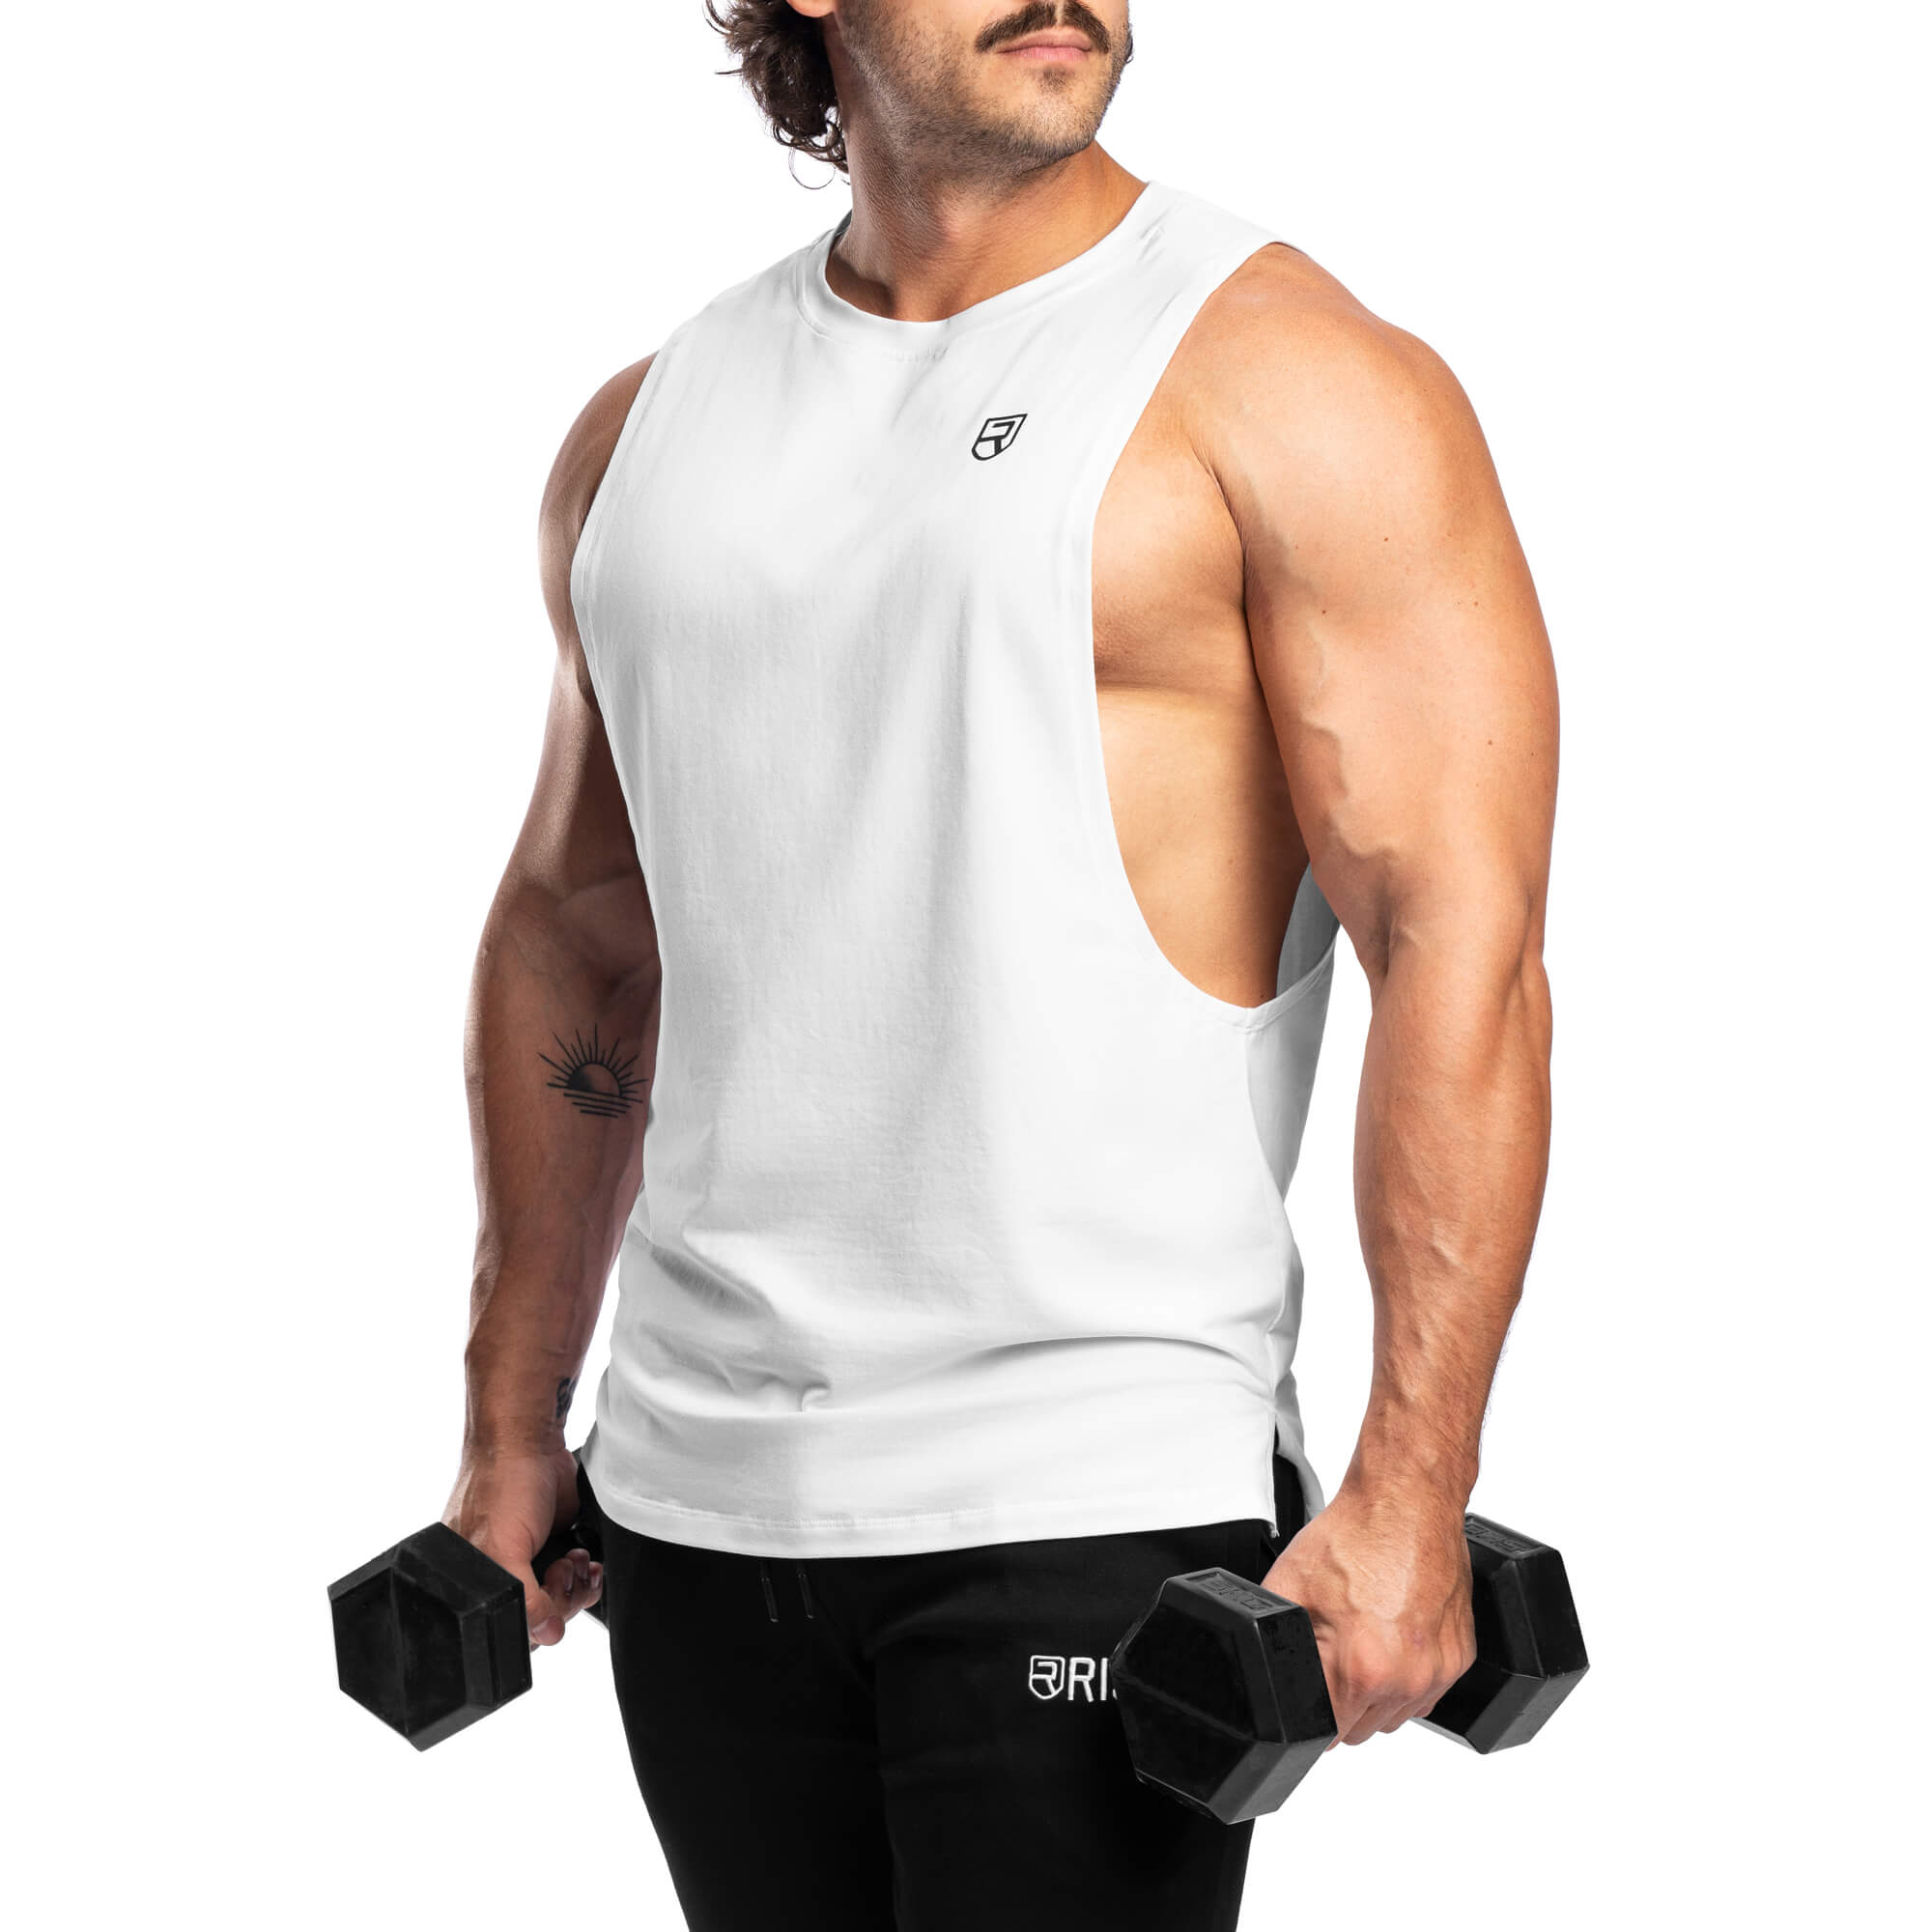 Sculpting and firming CryoShape tank top for men